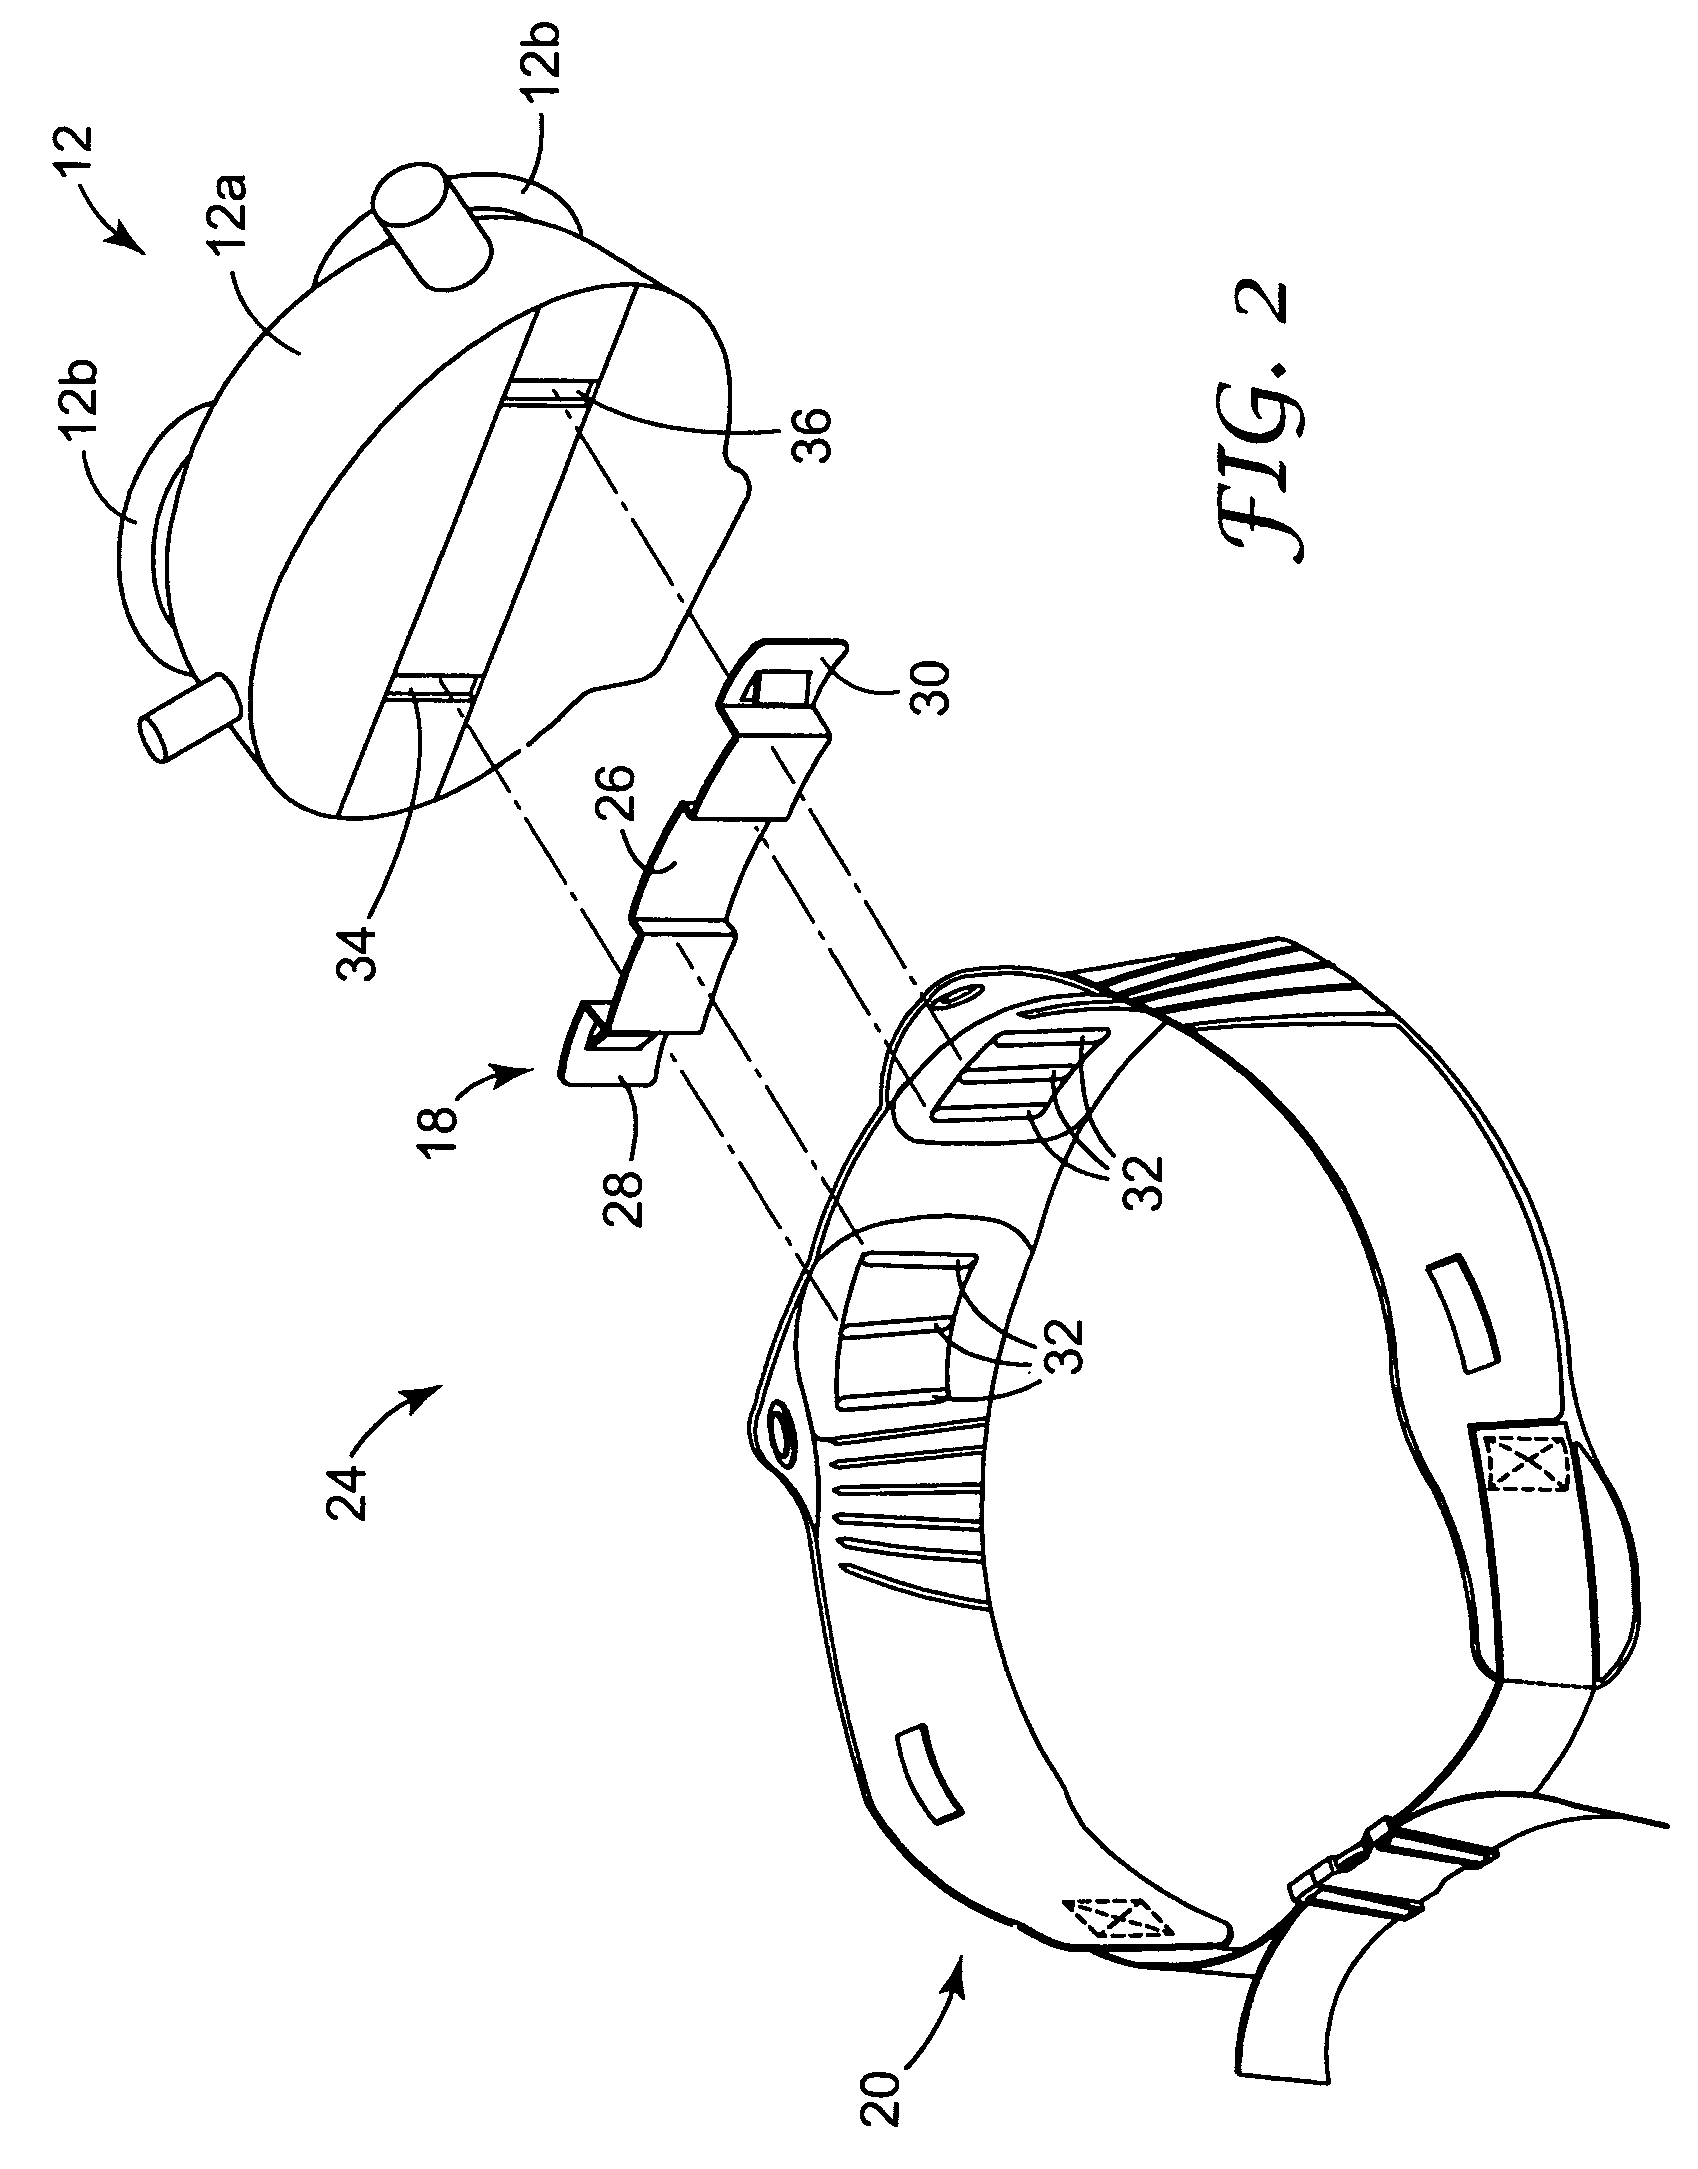 Respiratory component mounting assembly